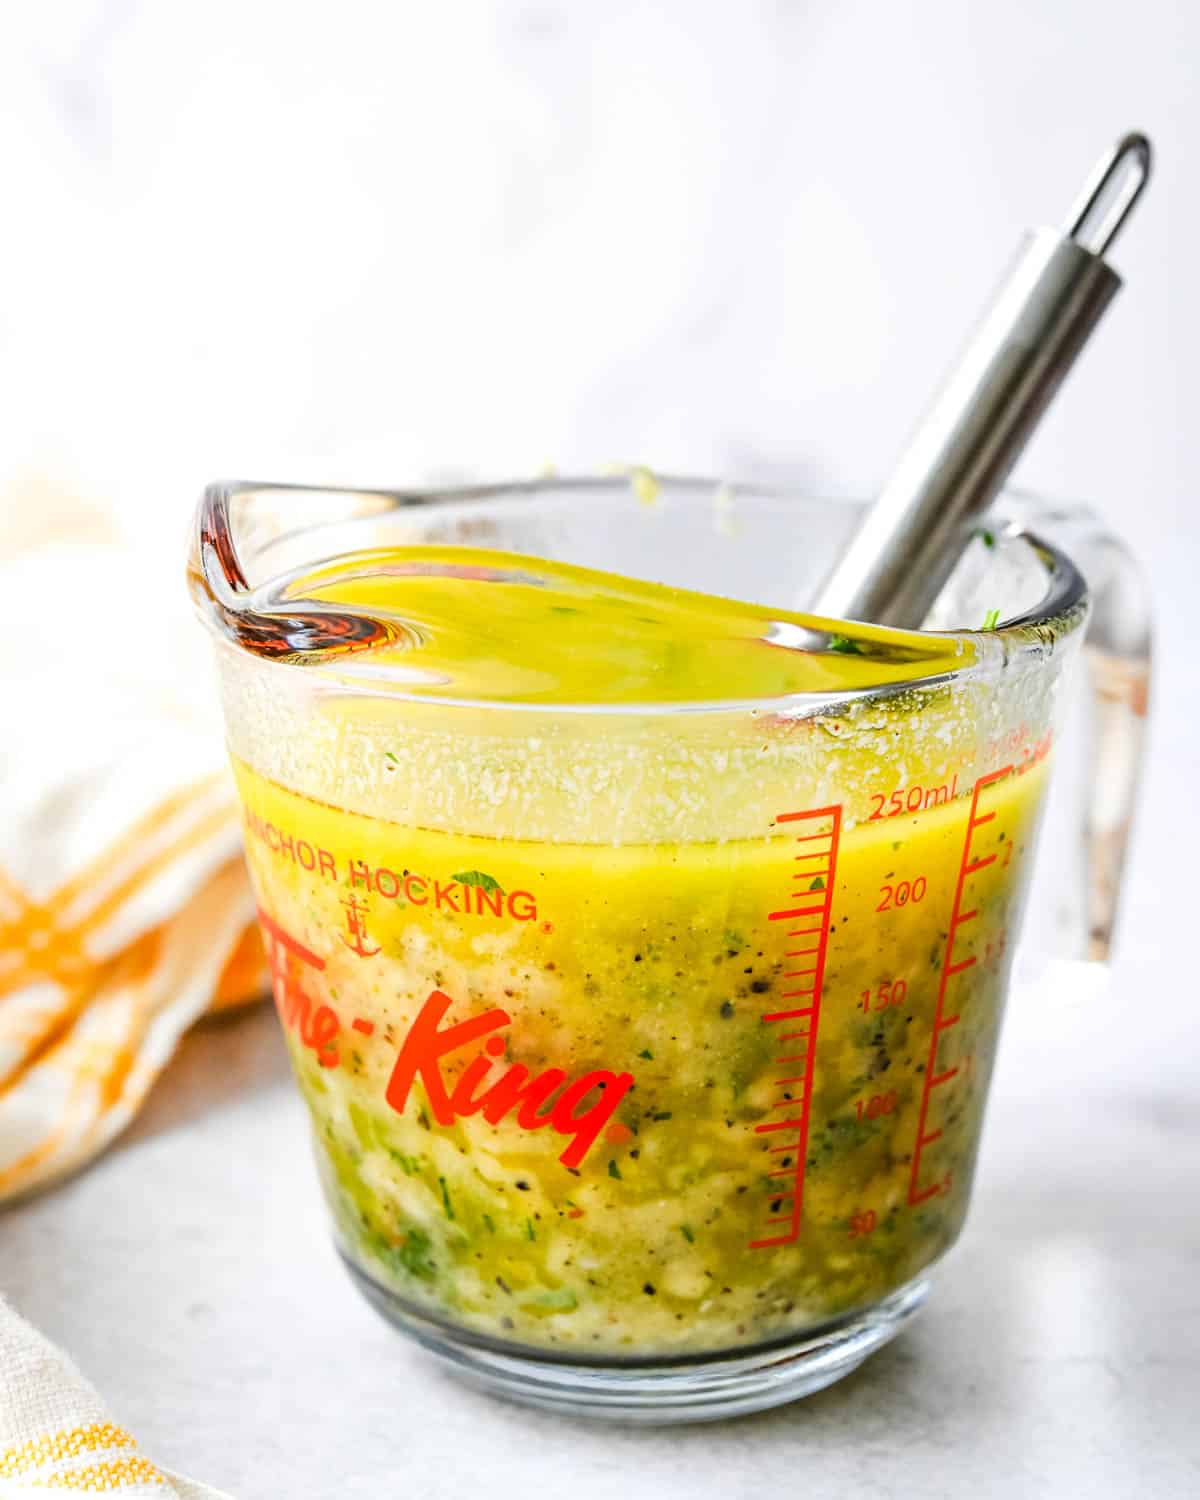 Whisking the vinaigrette in a measuring cup.